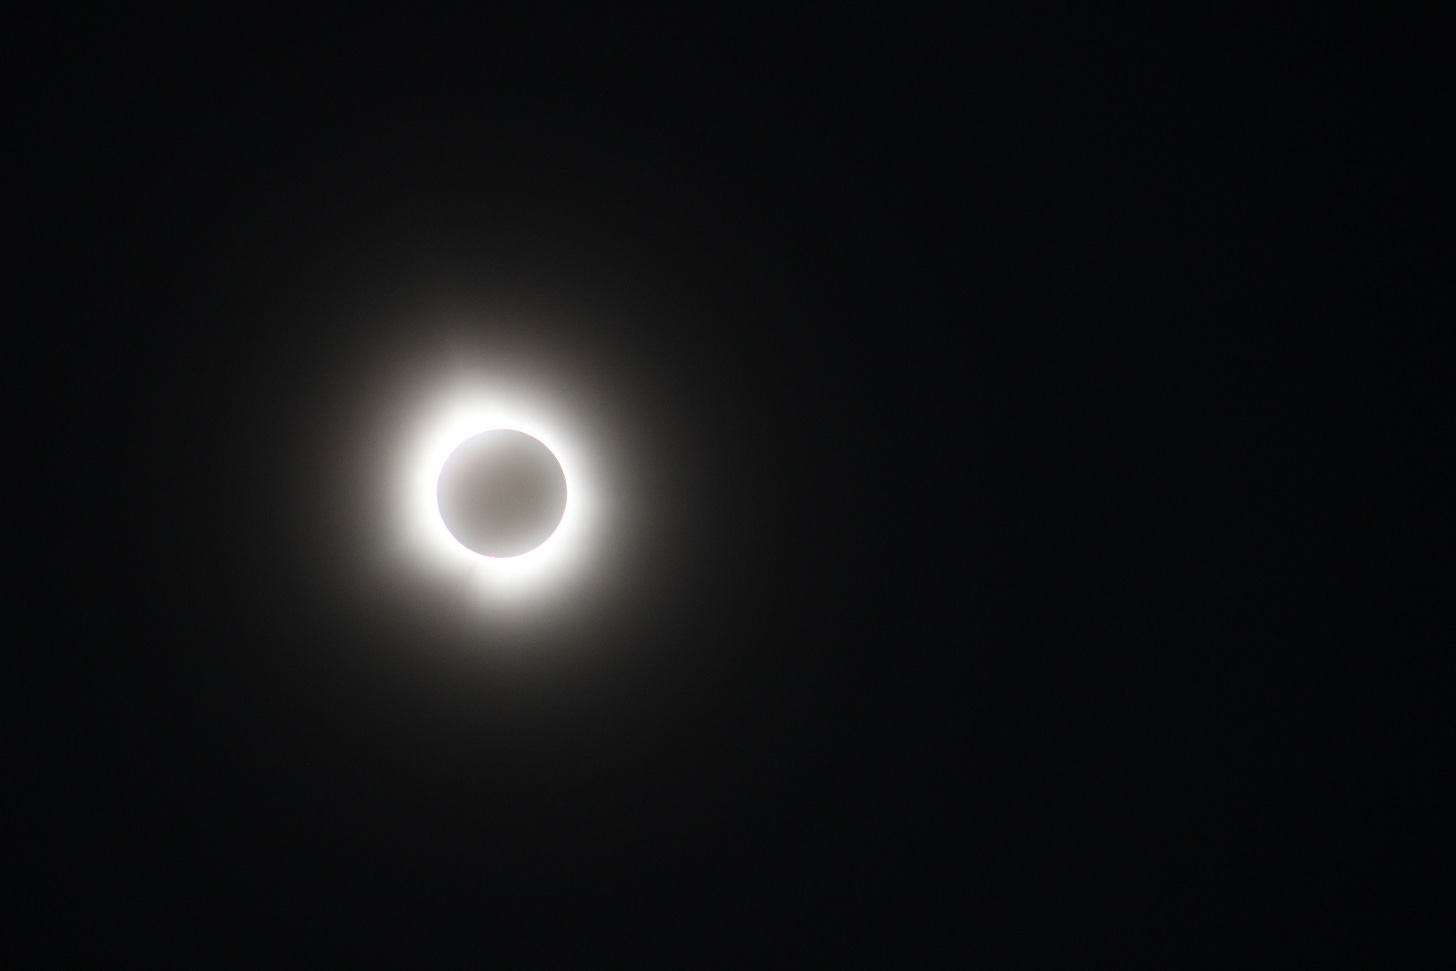 A view of a total solar eclipse.  The sky is black, the sun is radiating out from behind the moon.